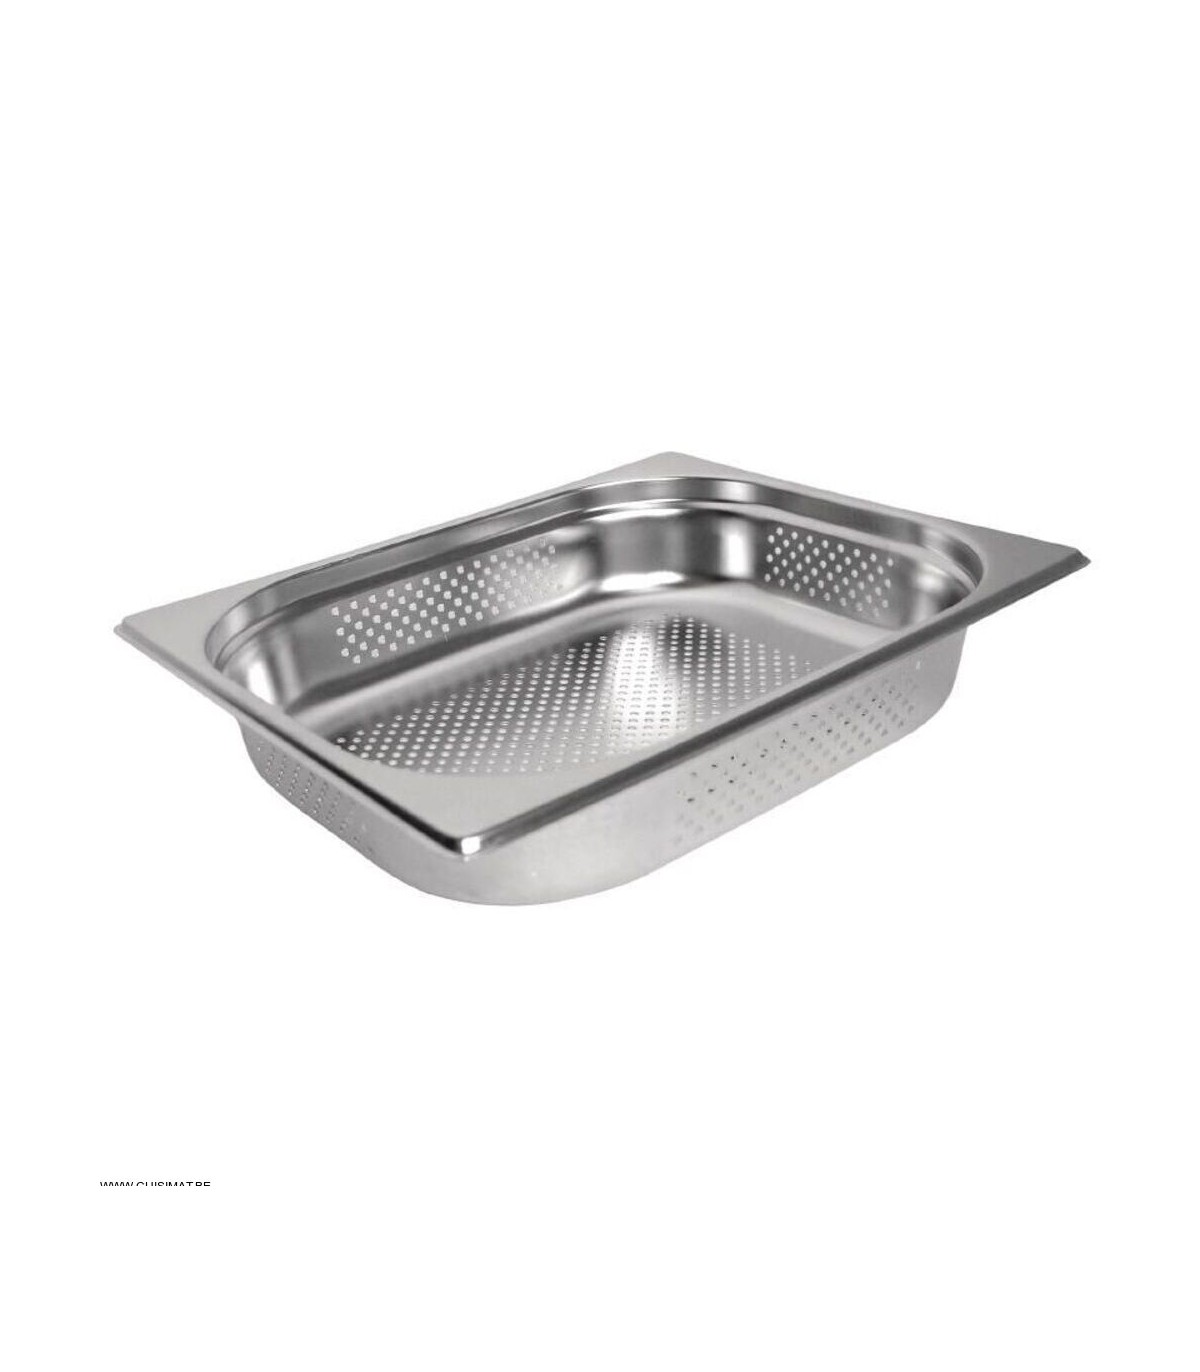 GN 1/2 PERFORE (325 * 265MM) 150 MM  VOGUE dans BACS GASTRONORM ANTI-ADHESIF